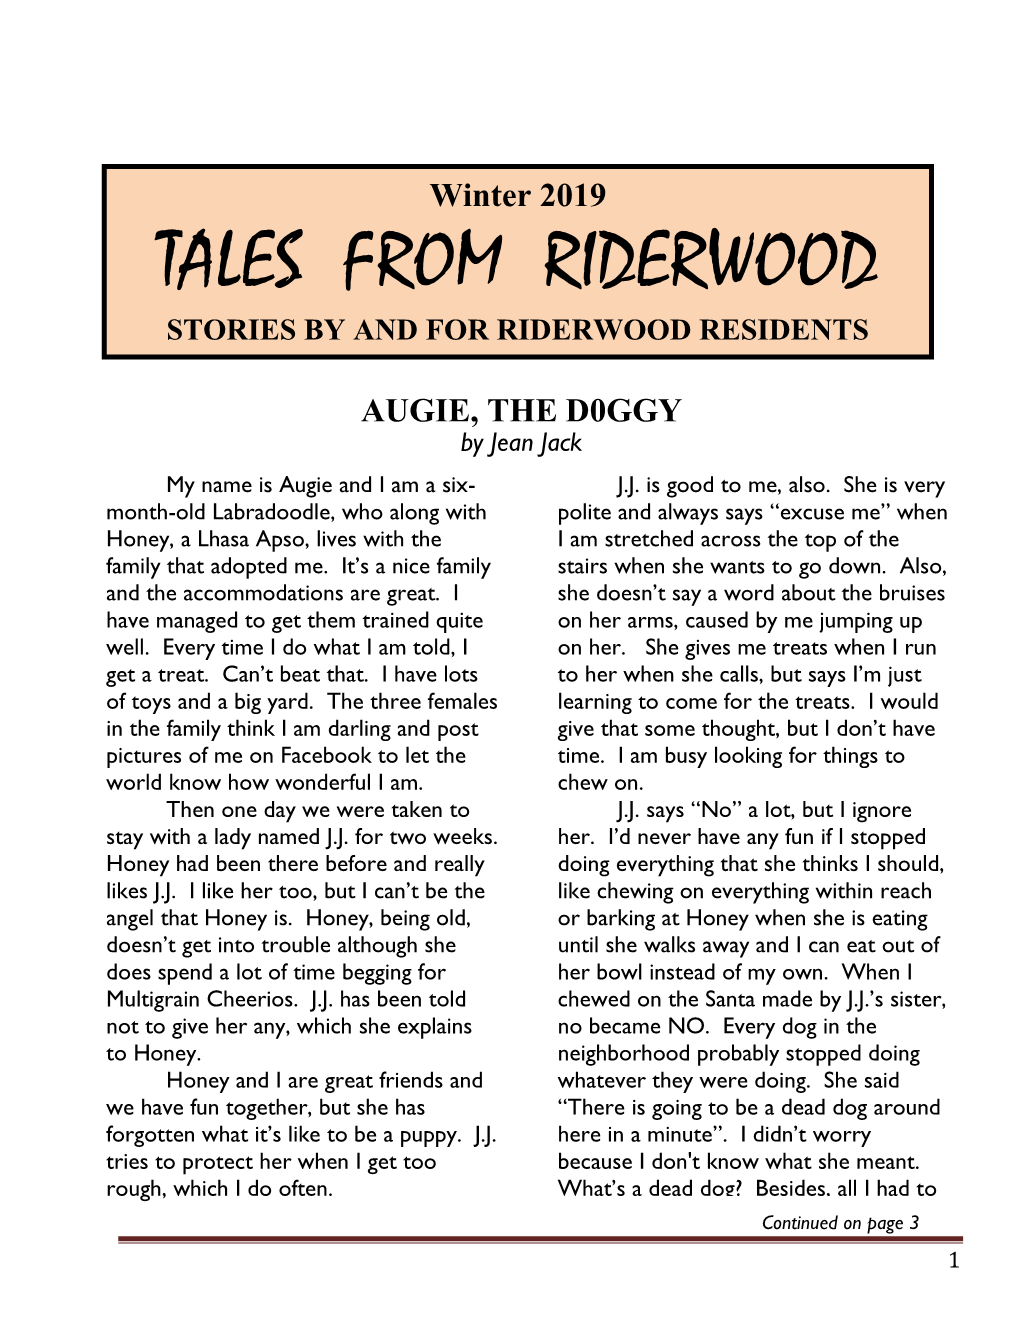 Tales from Riderwood Stories by and for Riderwood Residents